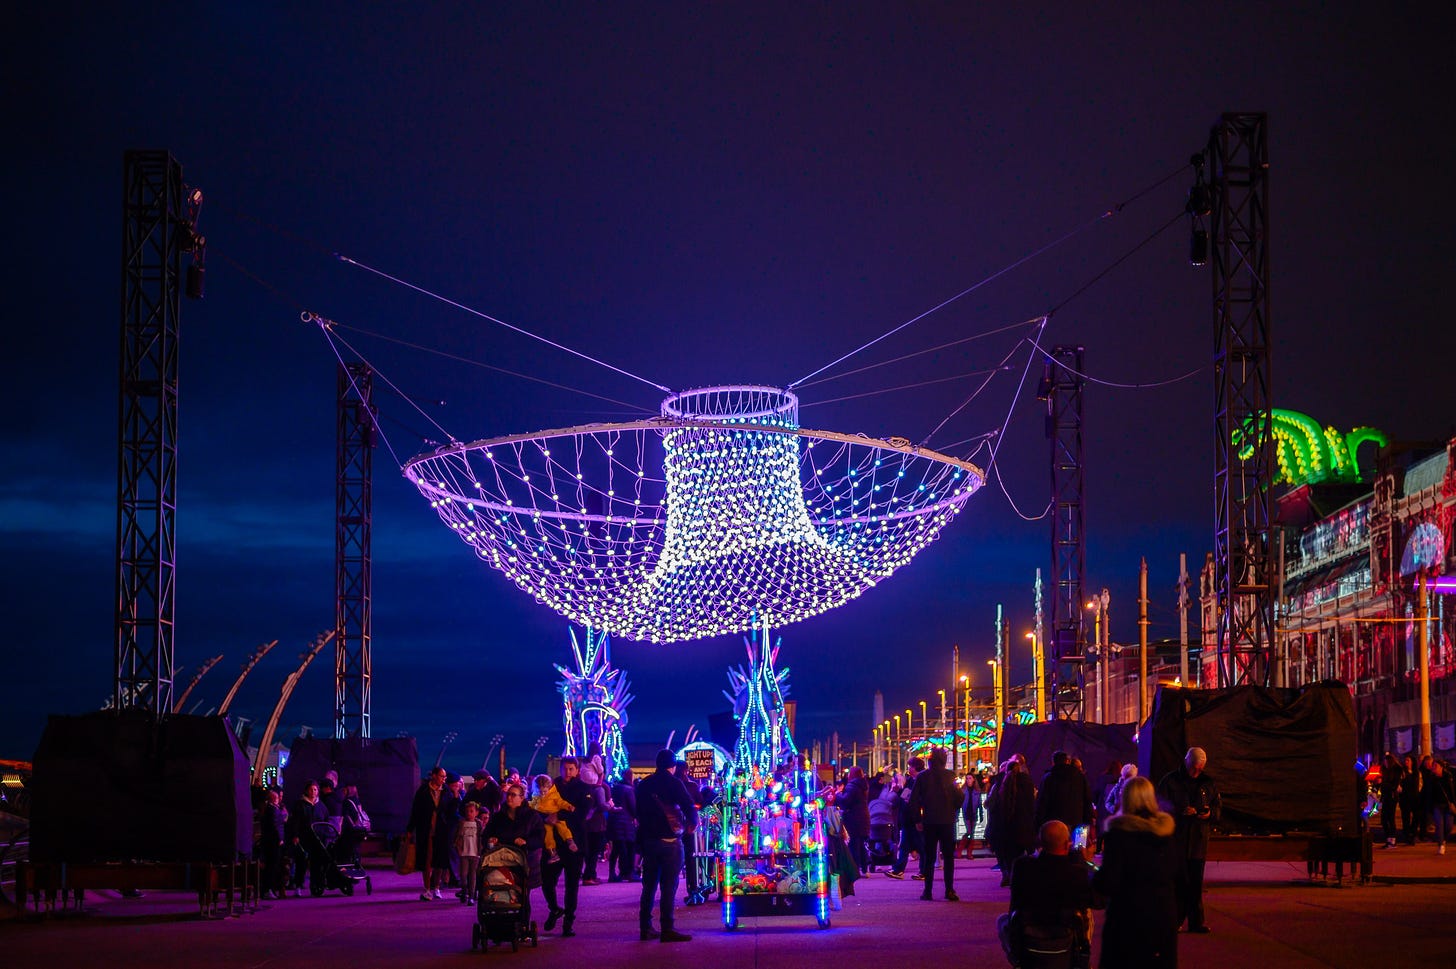 A cloud of LED lights hangs over a promenade at dusk as people walk underneath.